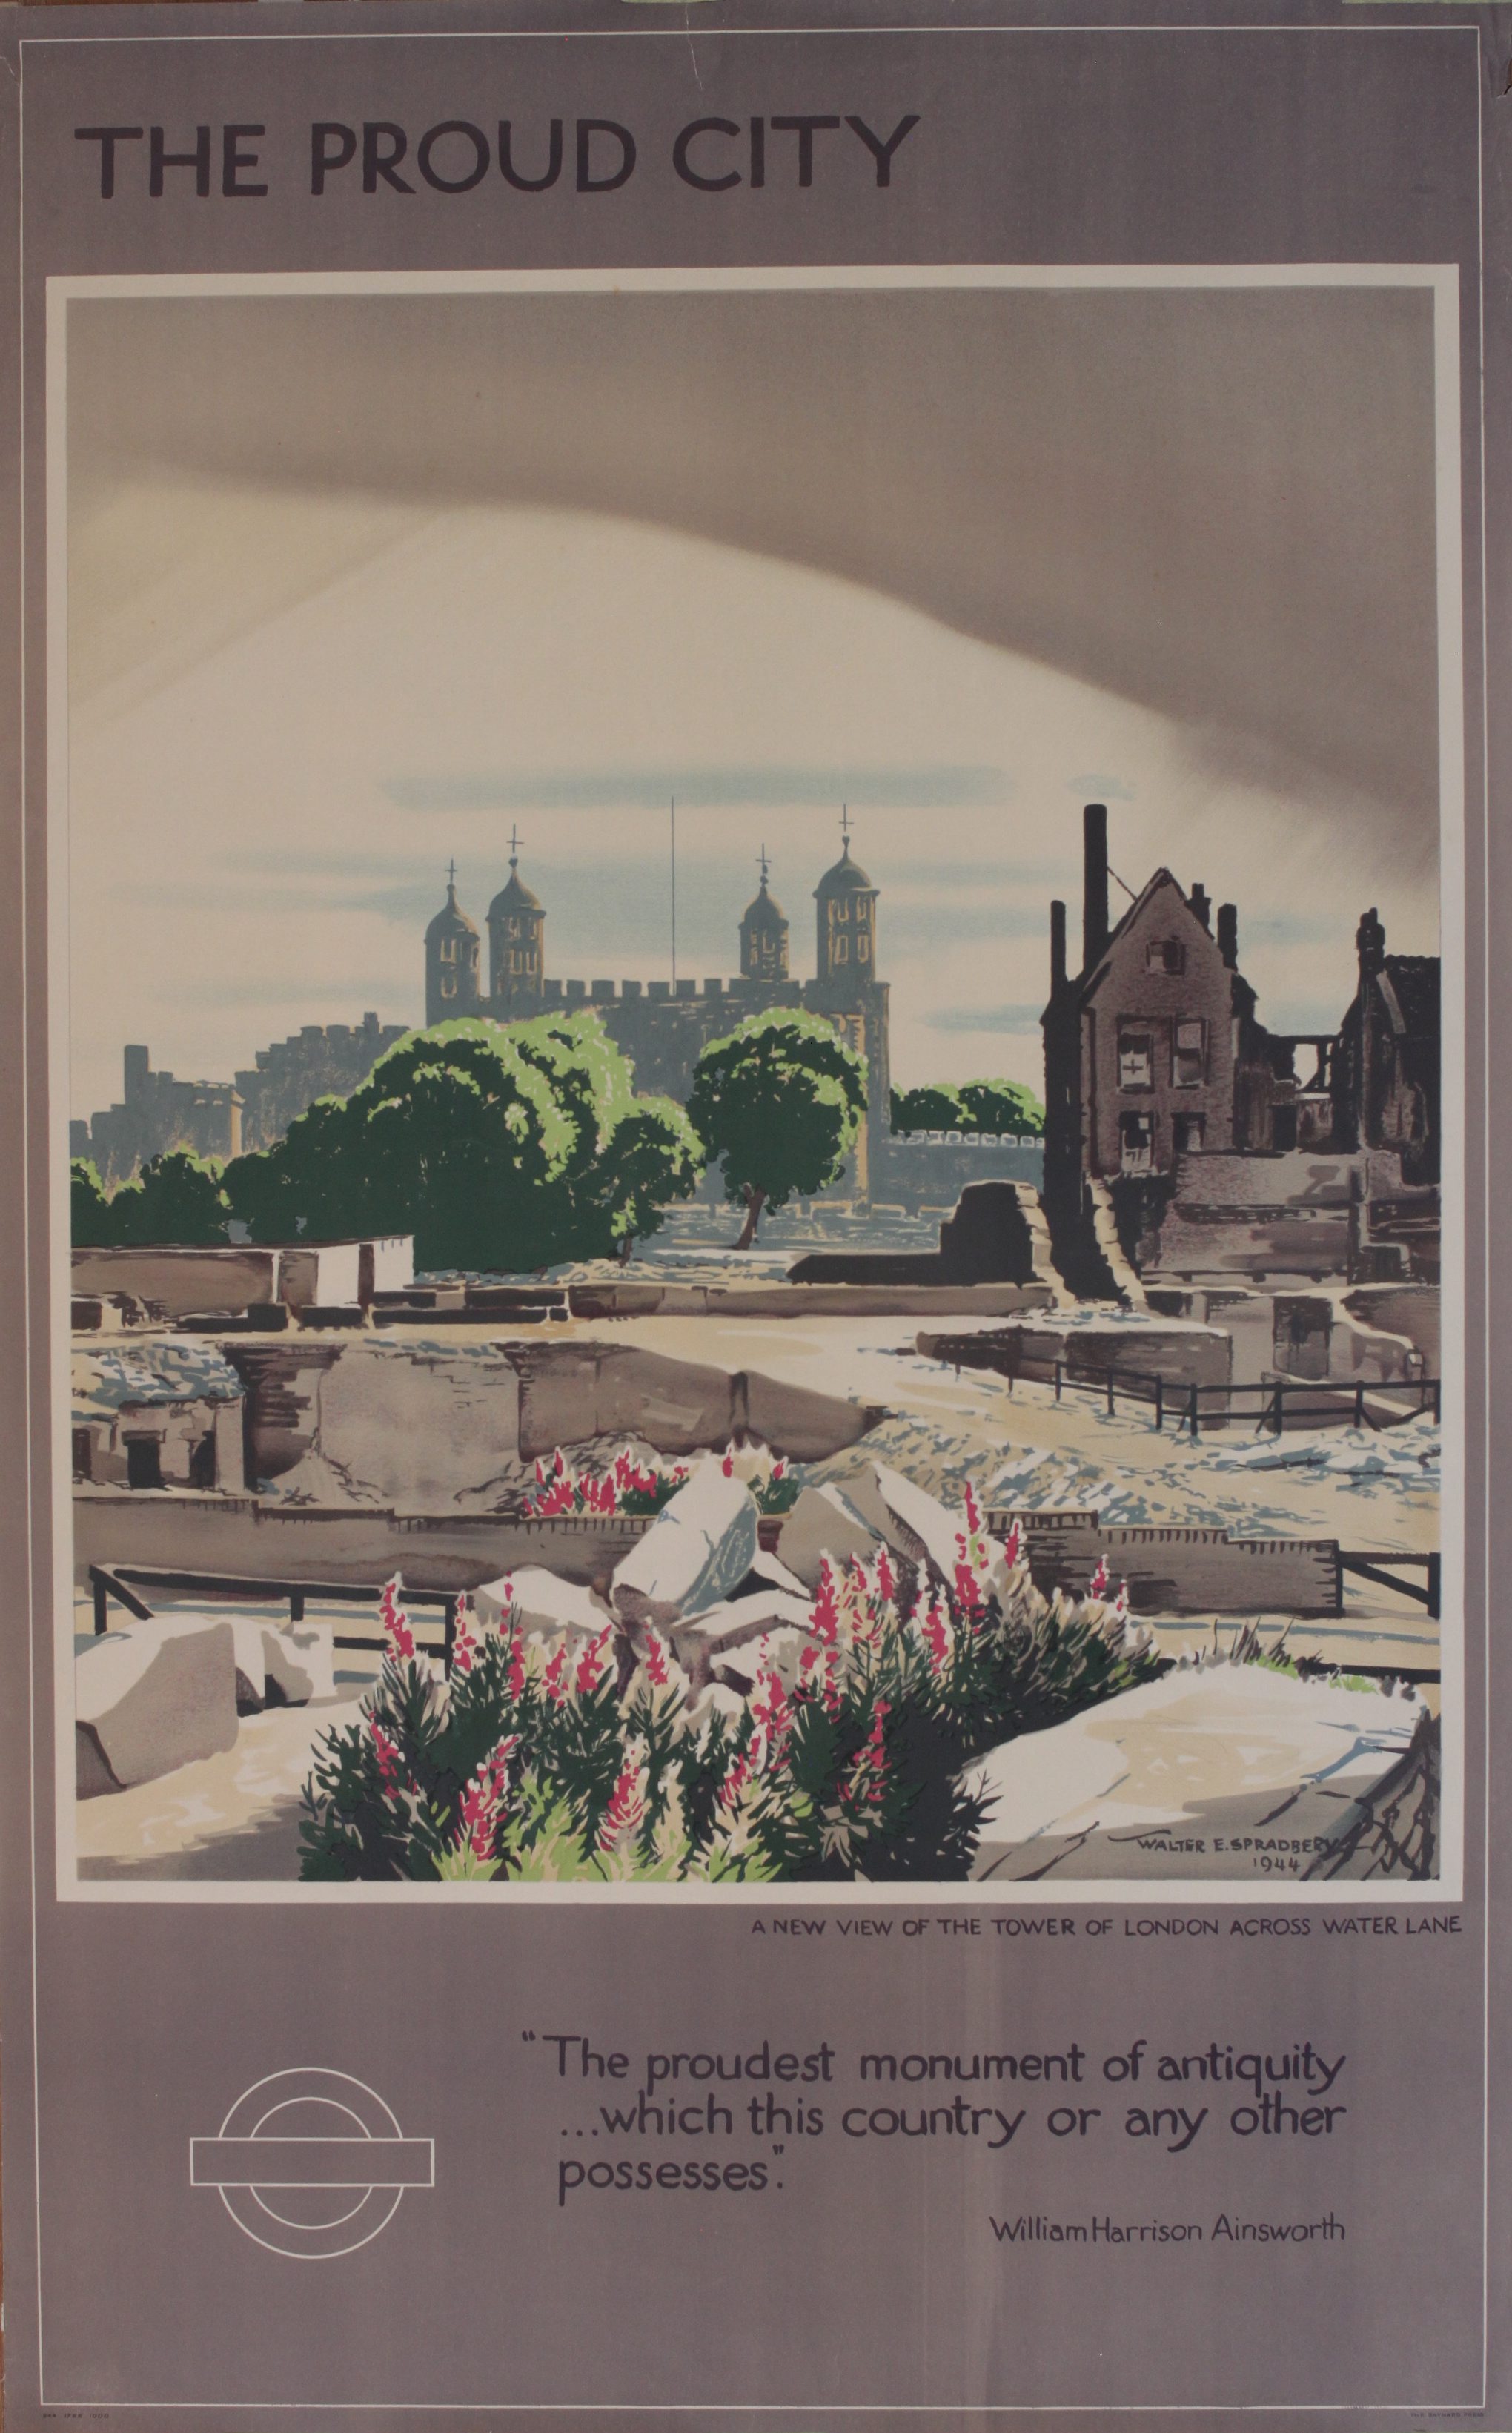 Walter E Spradbery (1889-1969) The Proud City, A new view of the Tower of London across Water Lane, printed for London Transport by Baynard Press, 1944, 102 x 63.5 cm (est. £300-£400). Onslows image